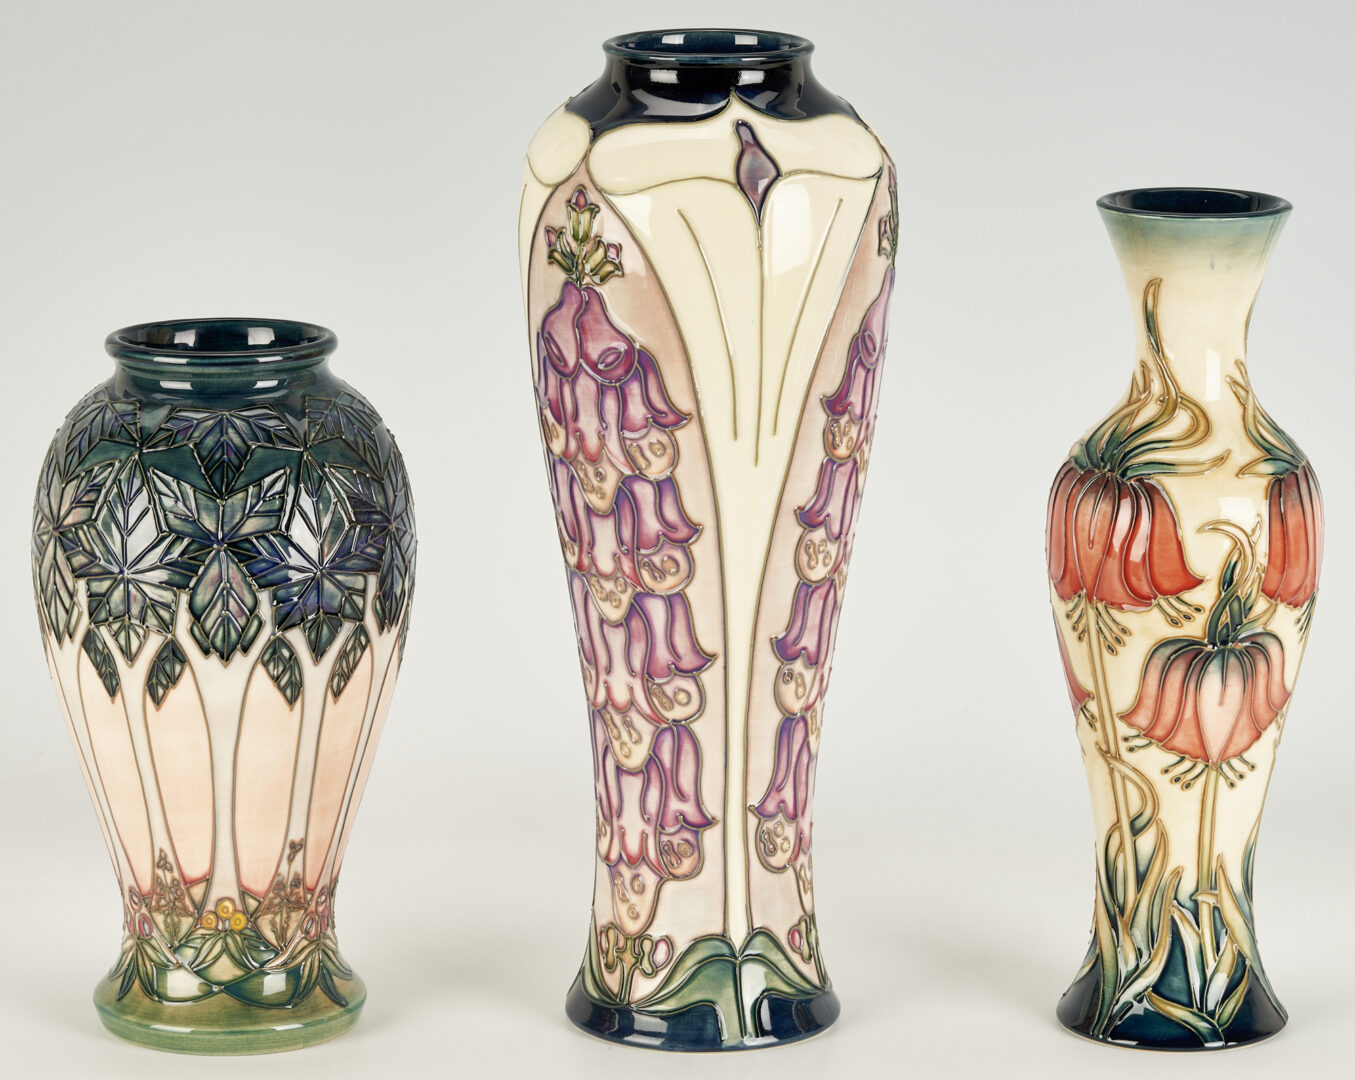 Lot 455: 6 Moorcroft Pottery Vases, incl. Cluny, Bramble, Foxglove, Cornflower, Crown Imperial & Sweet Briar